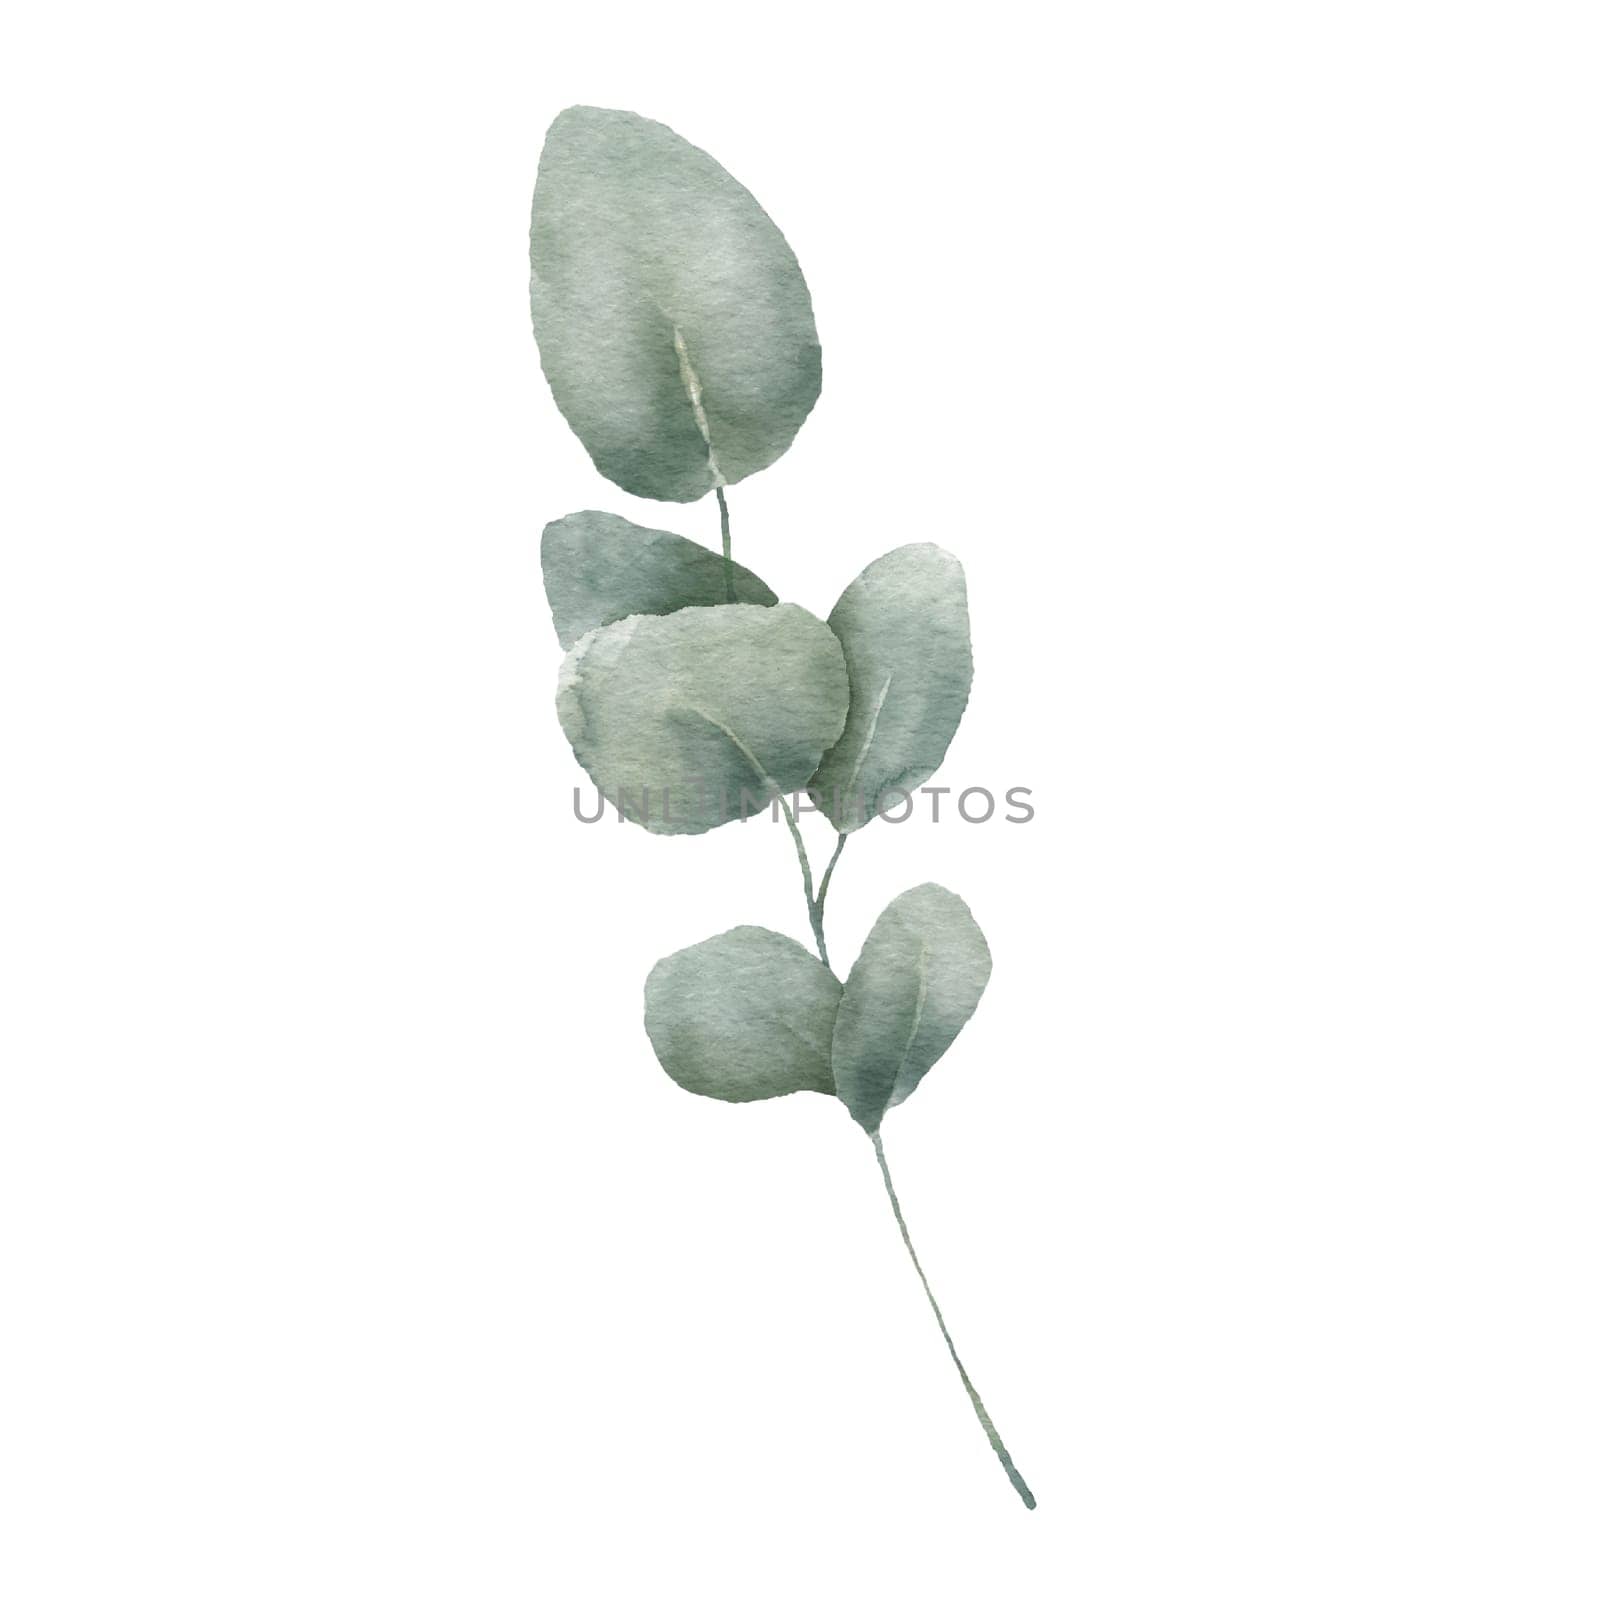 Watercolor Eucaliptus branch drawing. Hand drawn illustration with eucalyptus leaves isolated on white background. Floral herbal image of green plant.